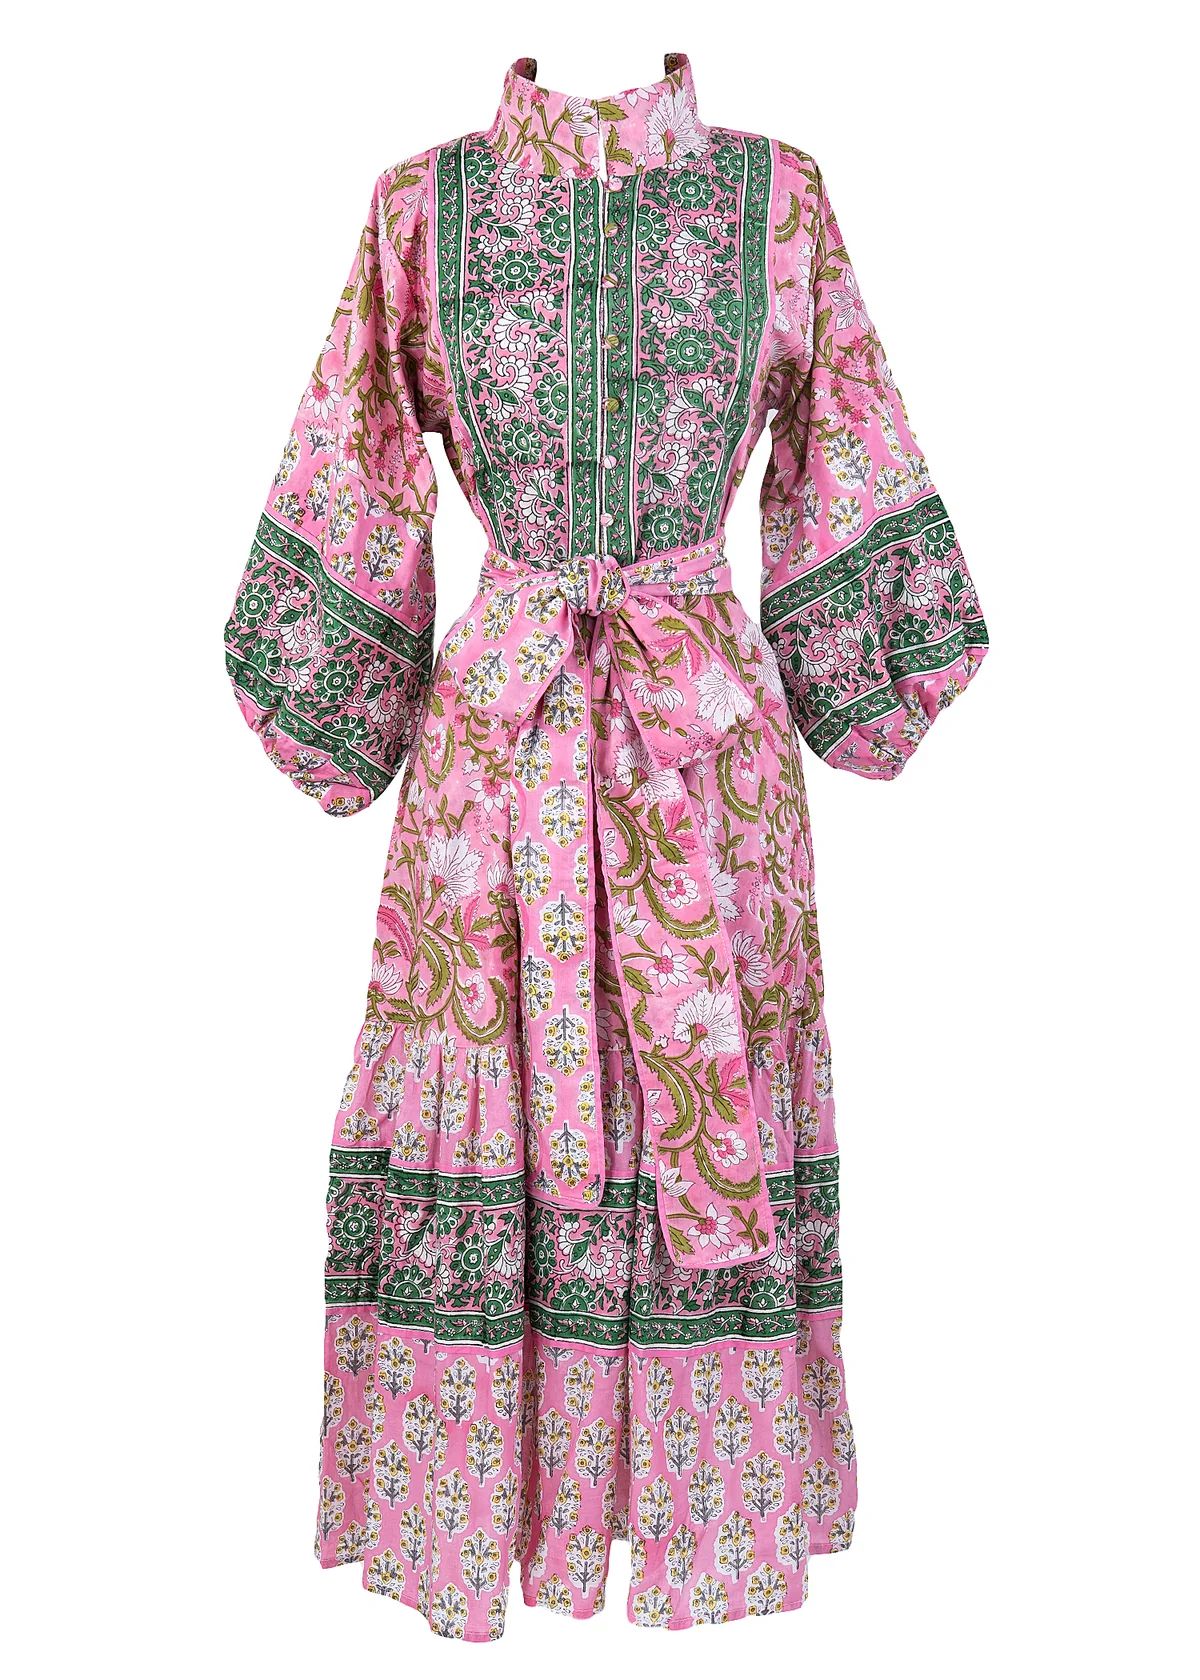 Sue Sartor Flounce Dress in Green and Pink Patio | Over The Moon